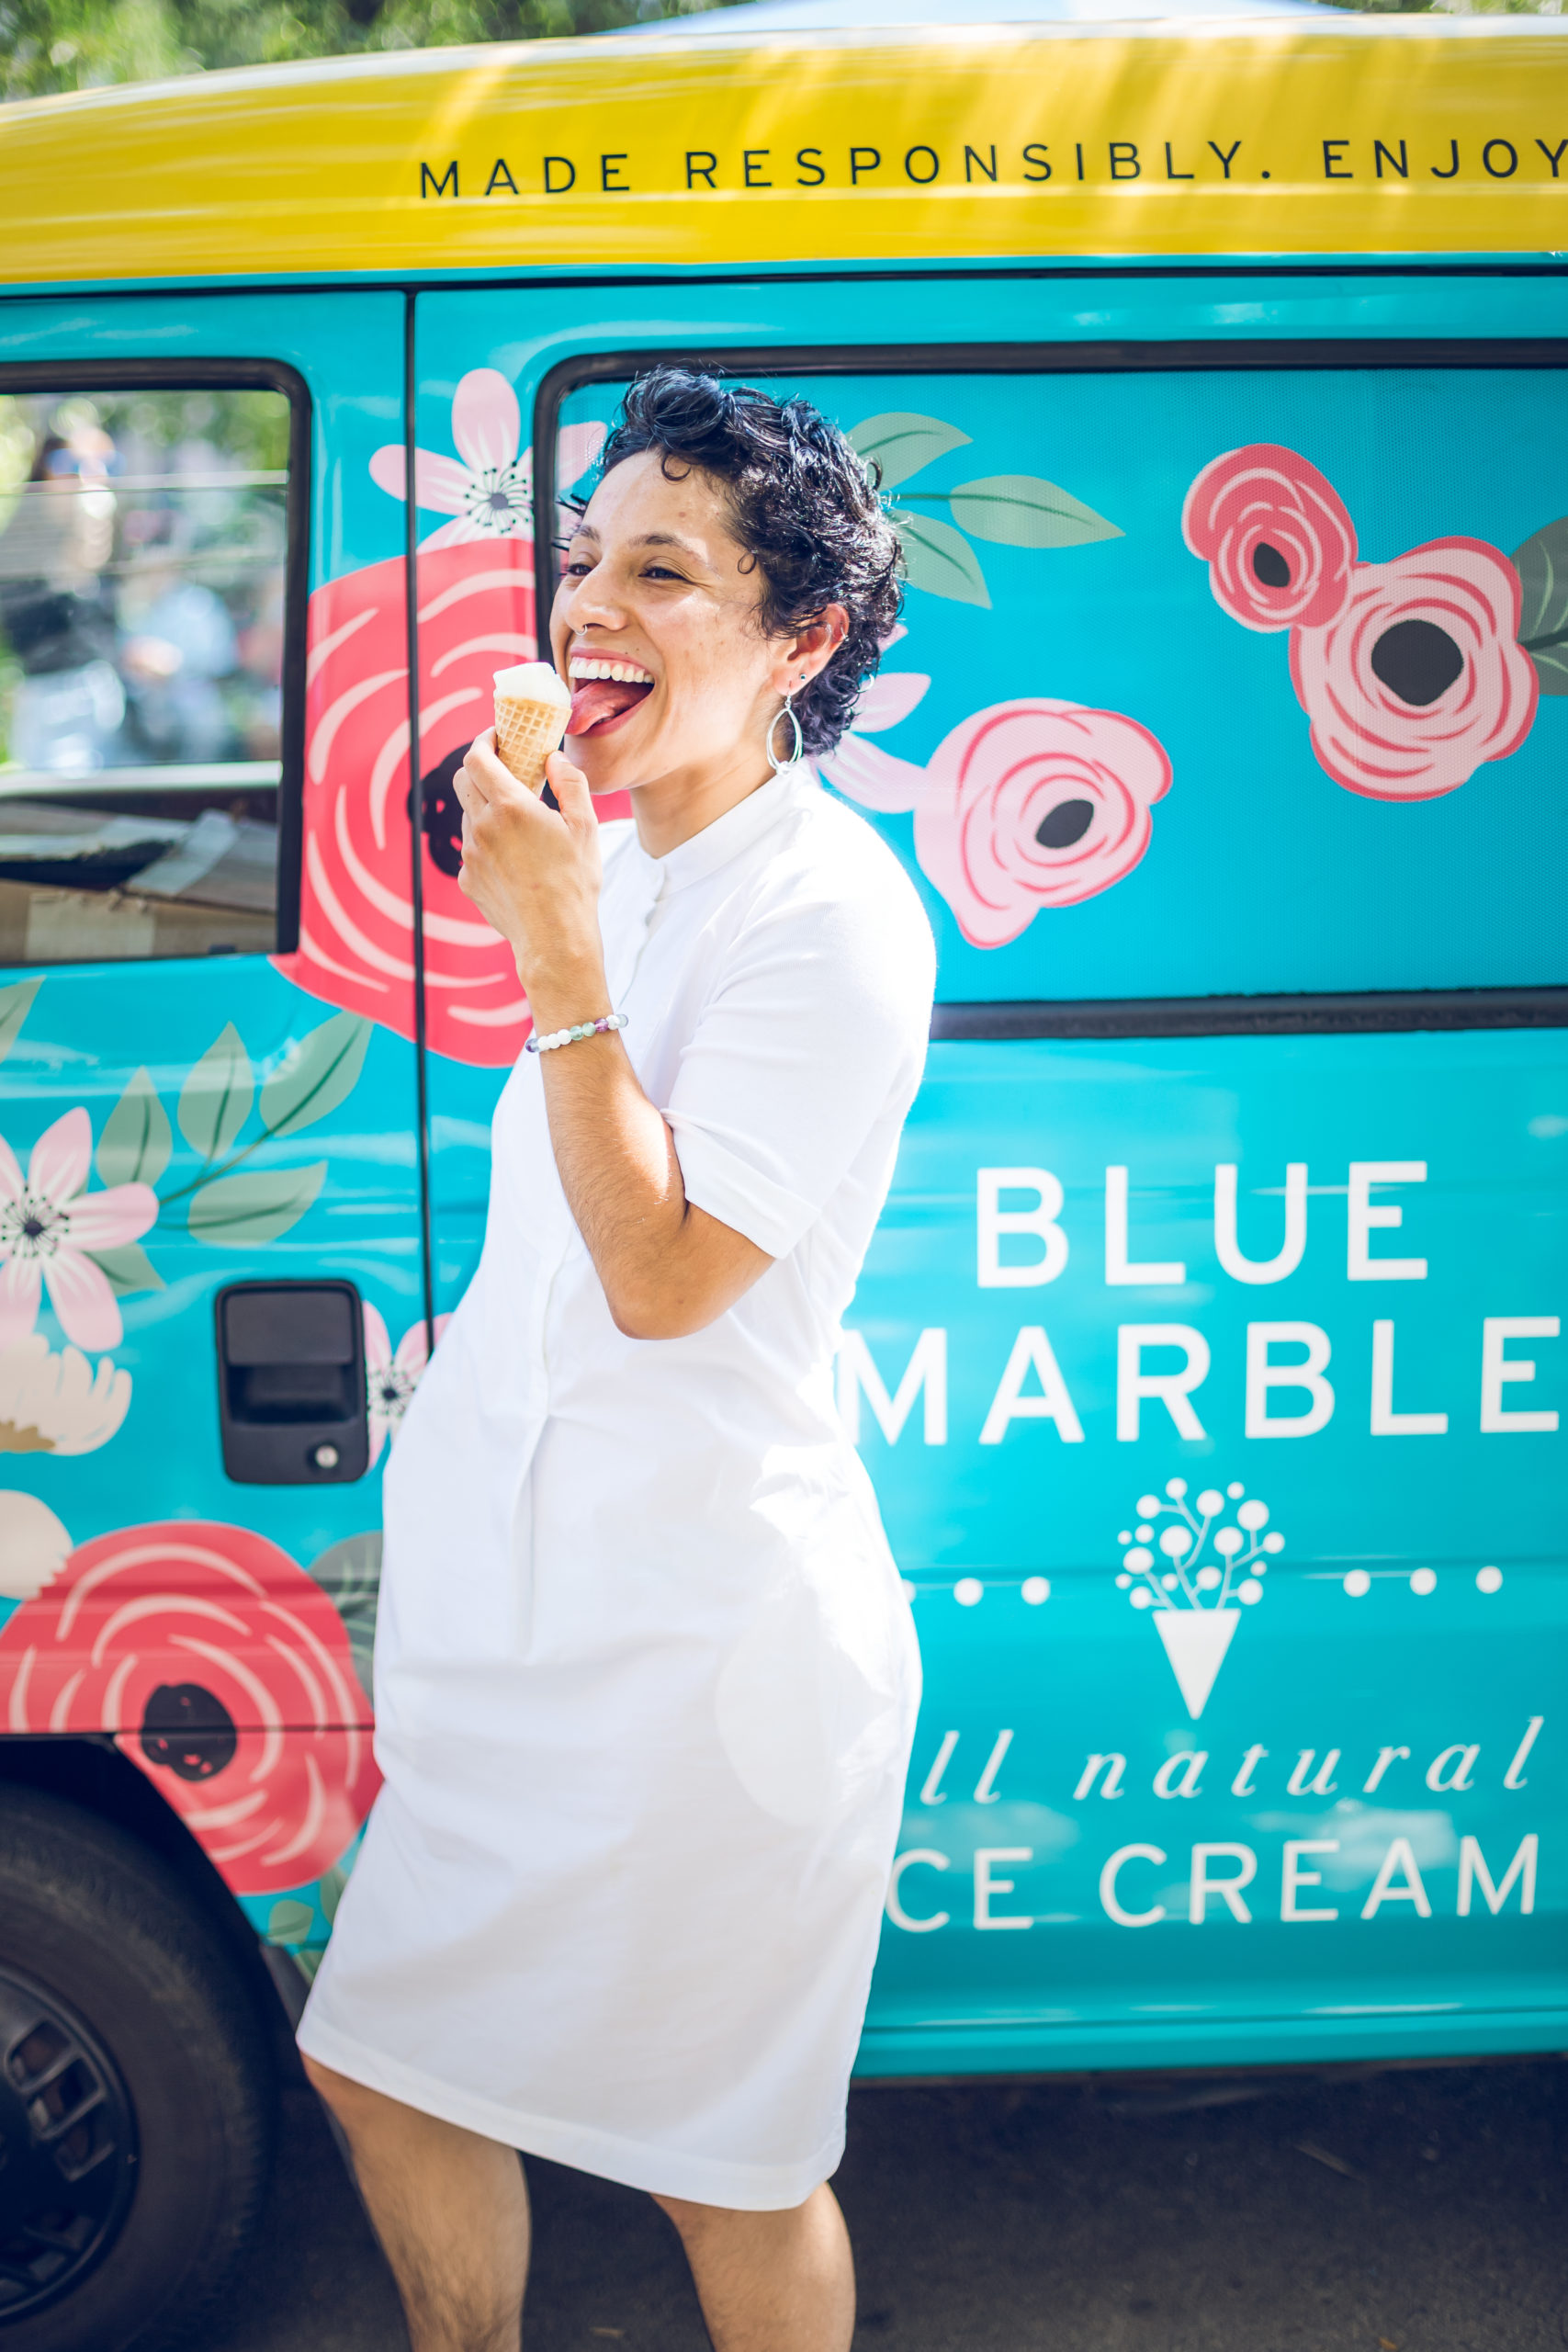 Marble ice cream integrated brand experience